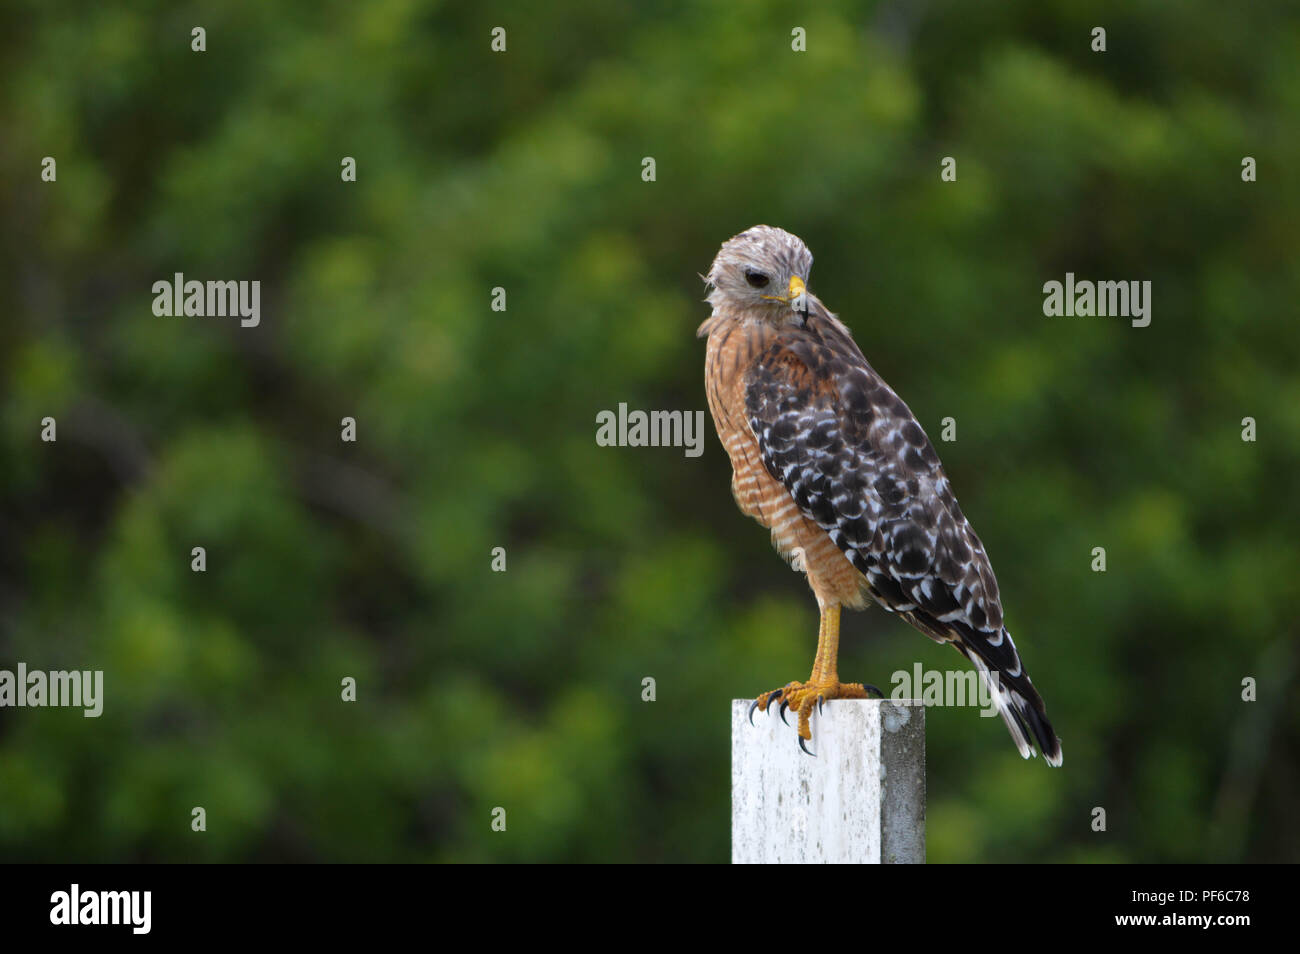 Red Shouldered Hawk Perches On Staff Gauge Post In Front of Vivid Green Background Stock Photo